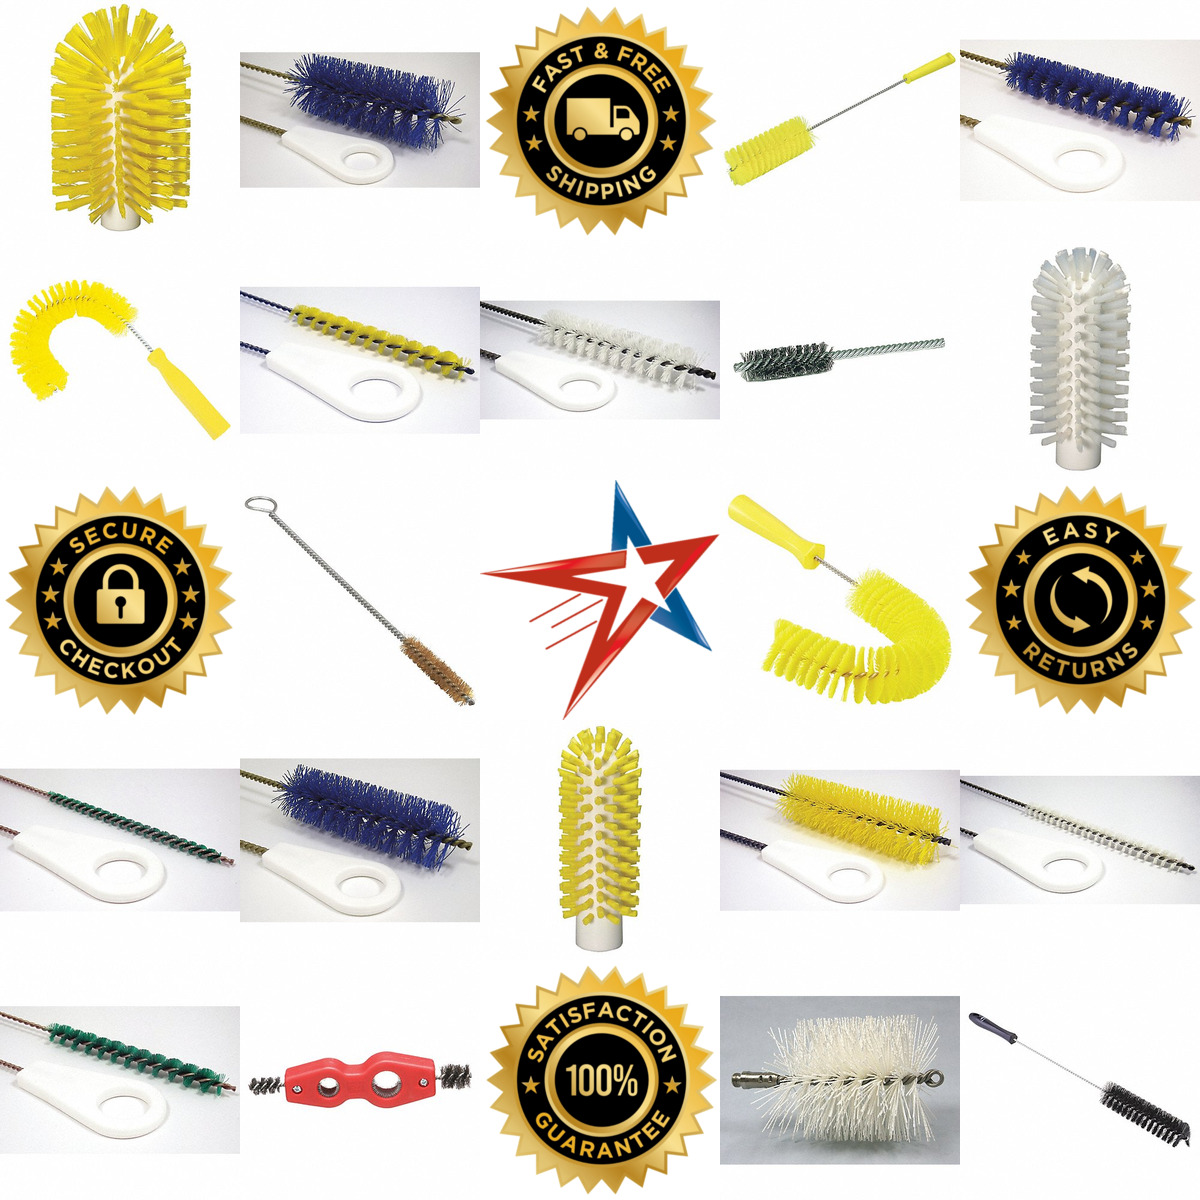 A selection of Pipe and Tubing Brushes products on GoVets